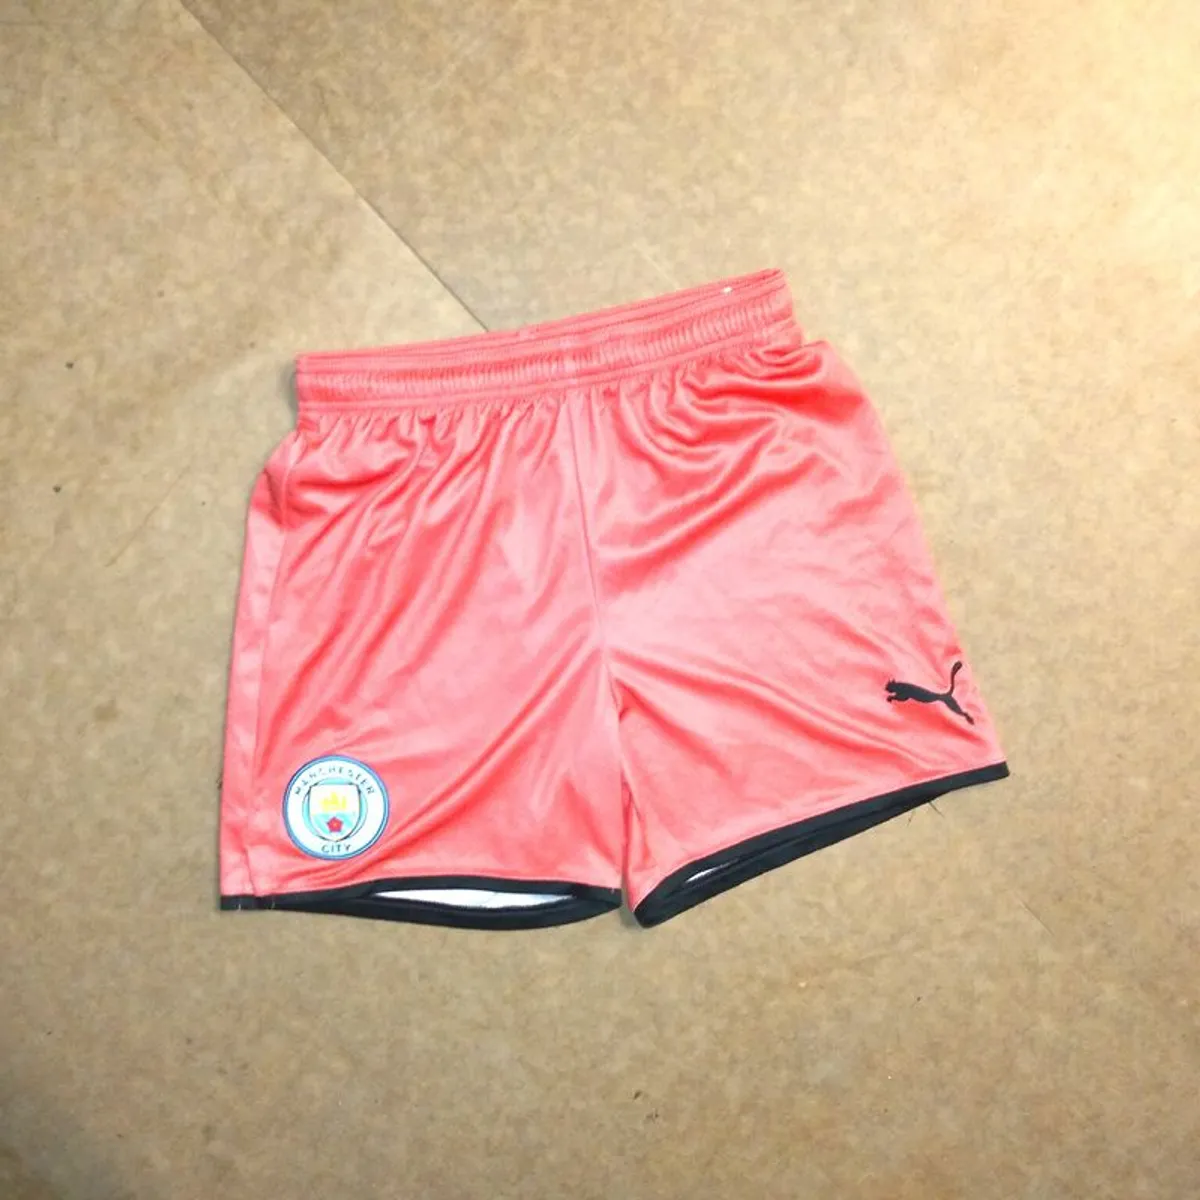 FREE POST Manchester City (13-14 Years)  Shorts  Puma  Football Soccer Peach Retro Boys Girls Youths Childs Childrens